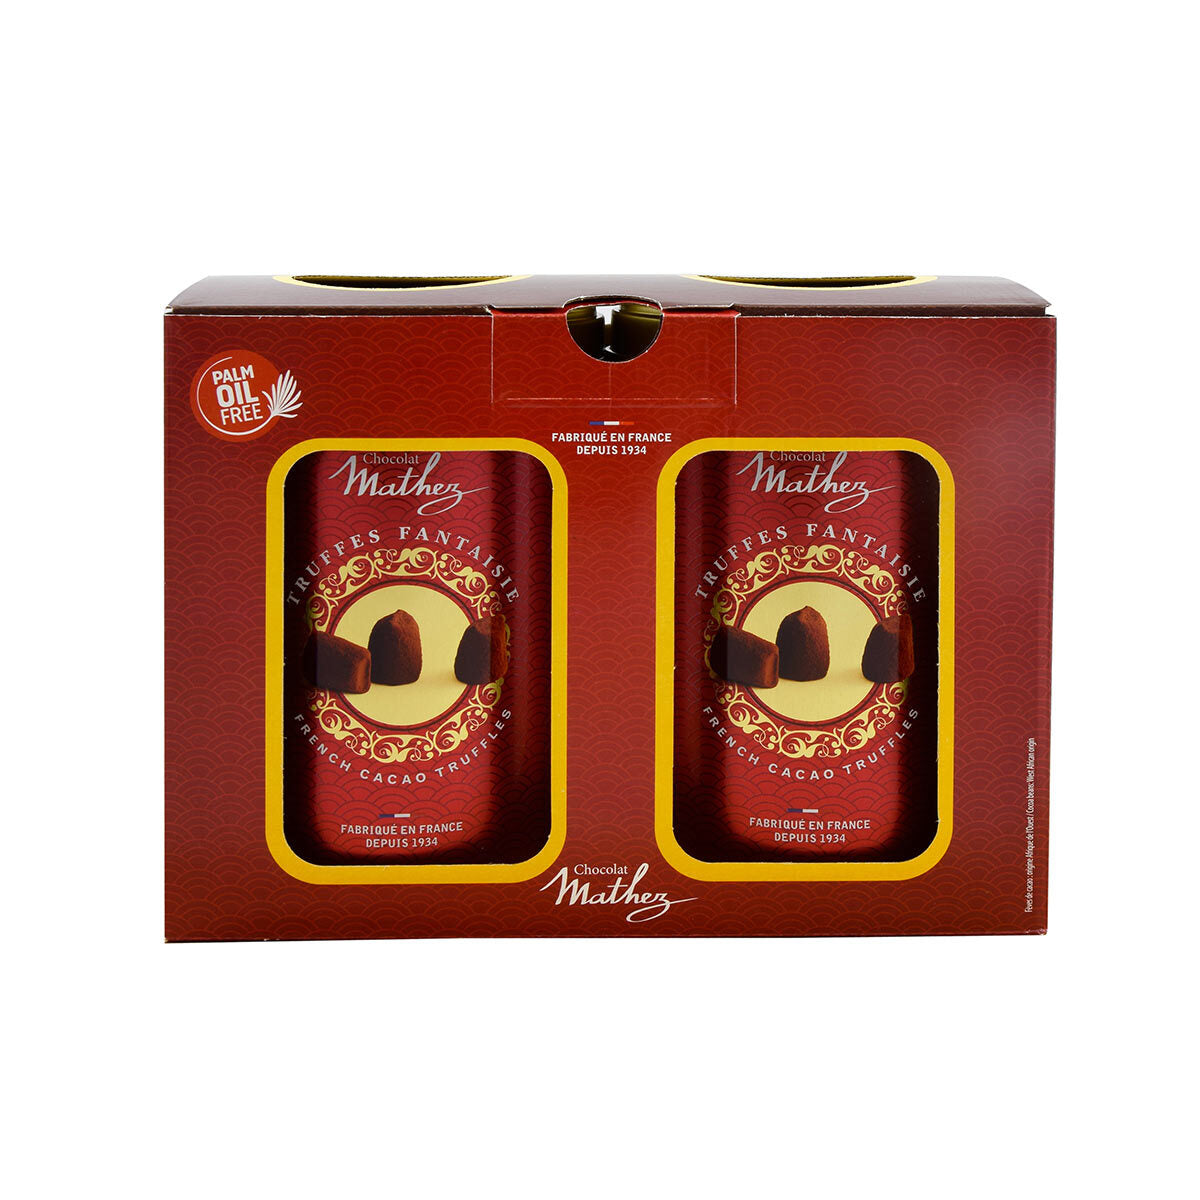 Mathez Cocoa Dusted French Truffles, 2 x 500g Tins Snacks Costco UK weight  